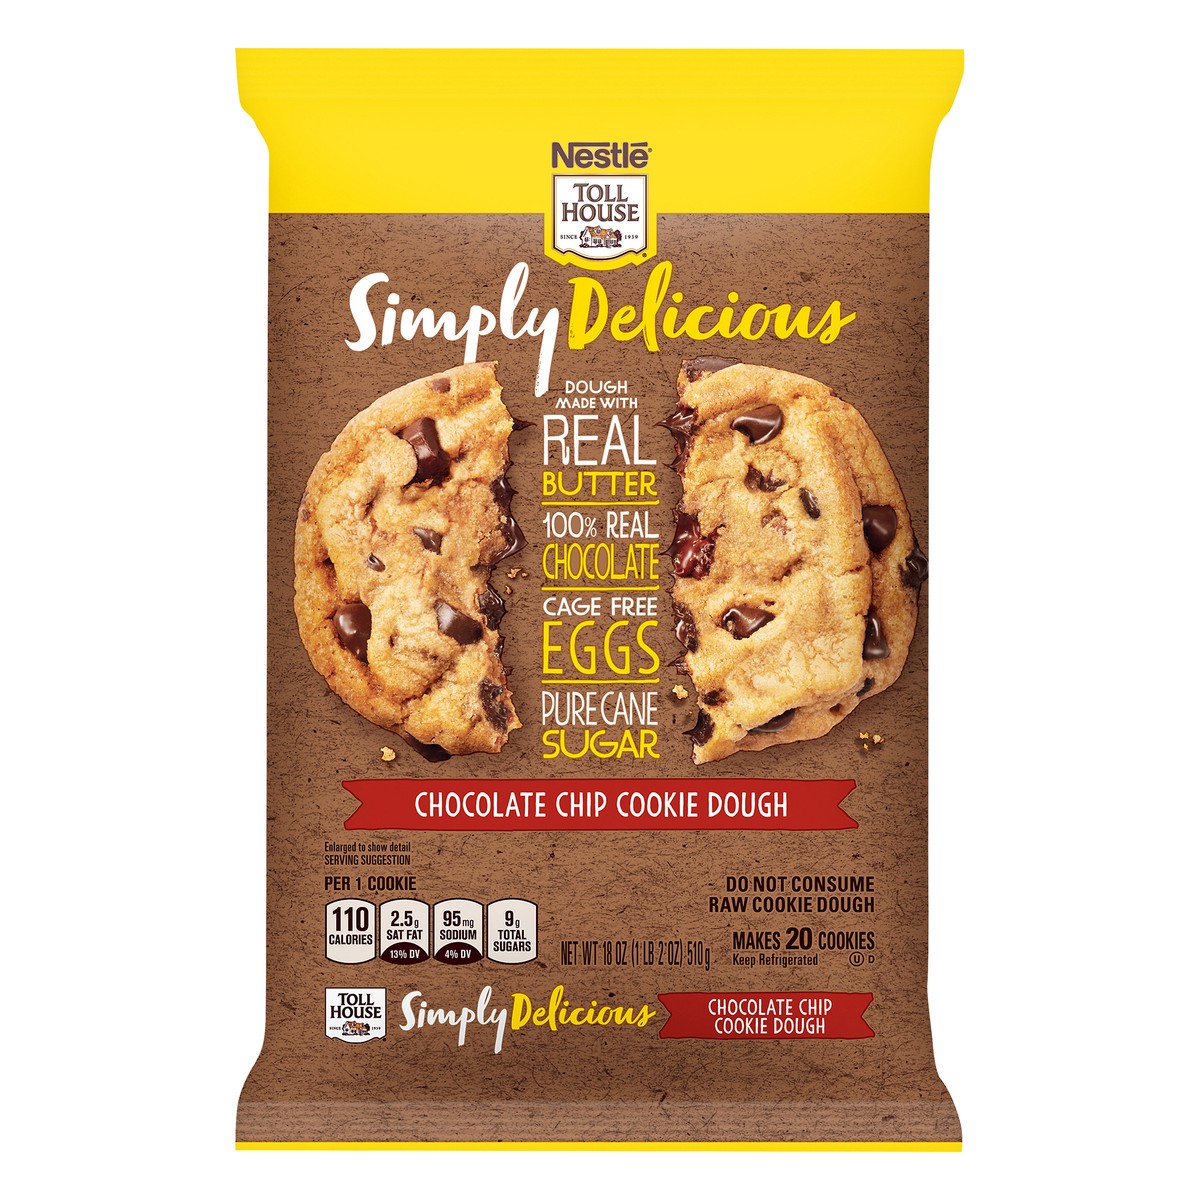 slide 1 of 8, Nestlé toll house simply delicious chocolate chip cookie dough, 18 oz